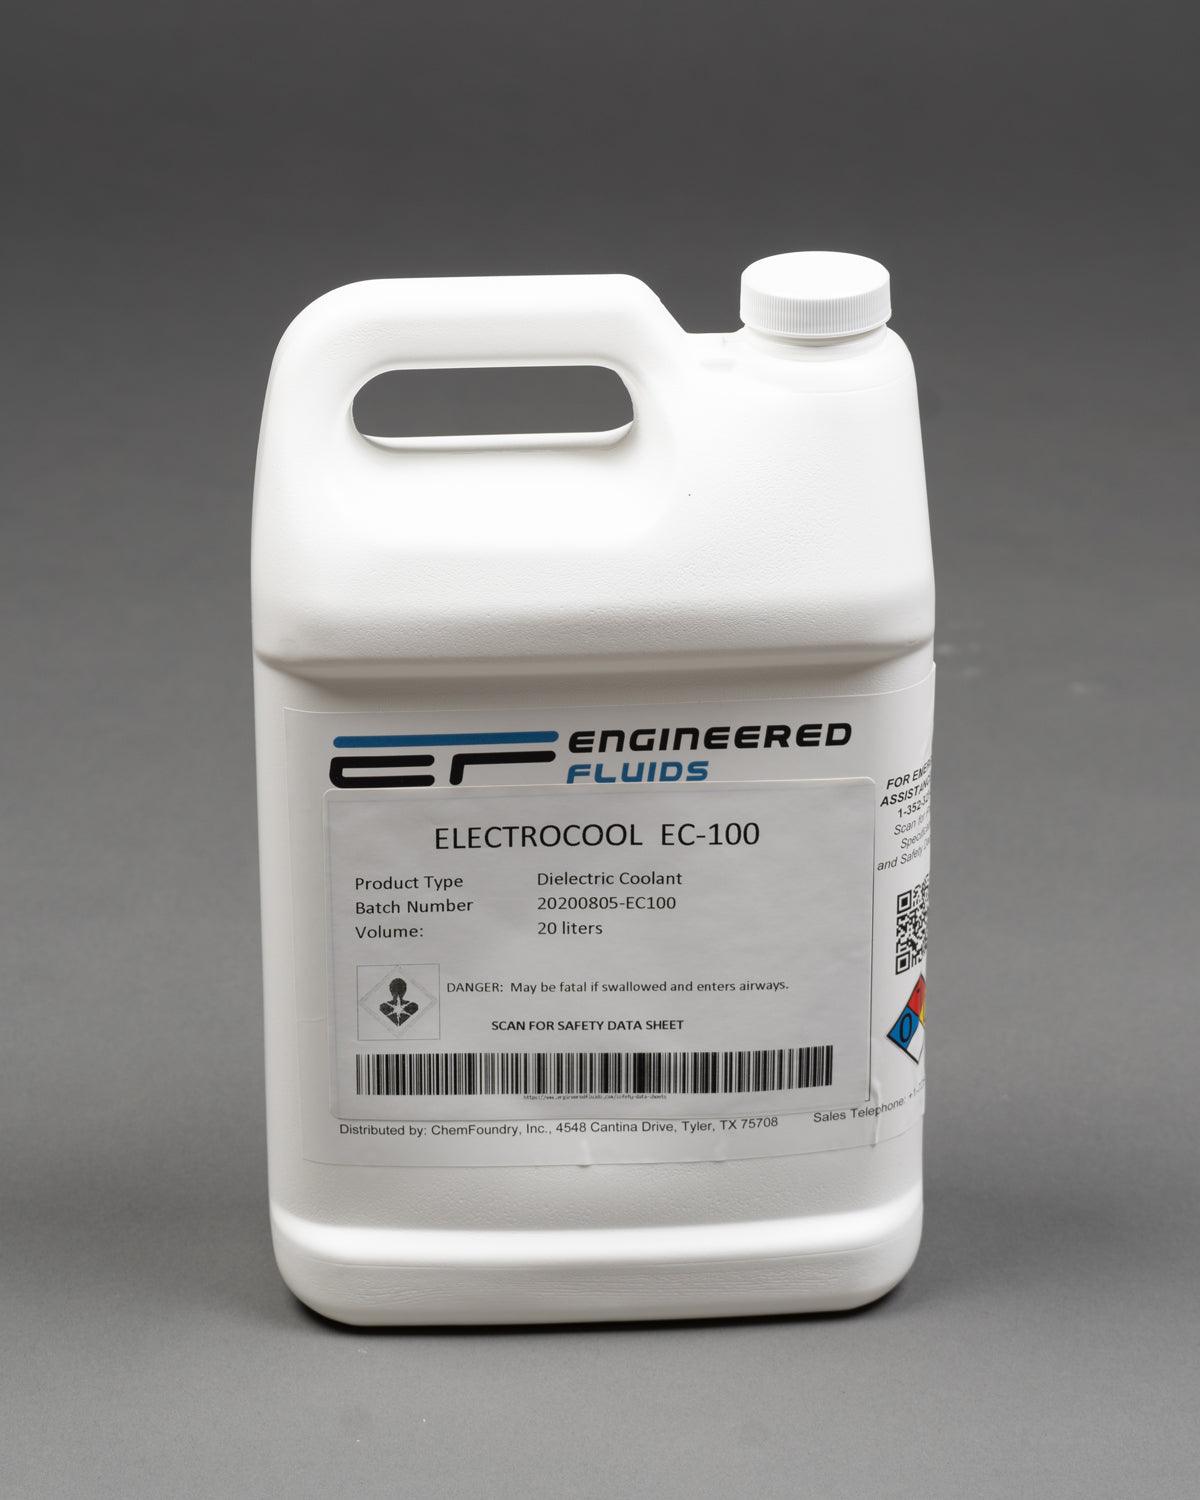 Electrocool Ec 100 Dielectric Coolant Engineered Fluids